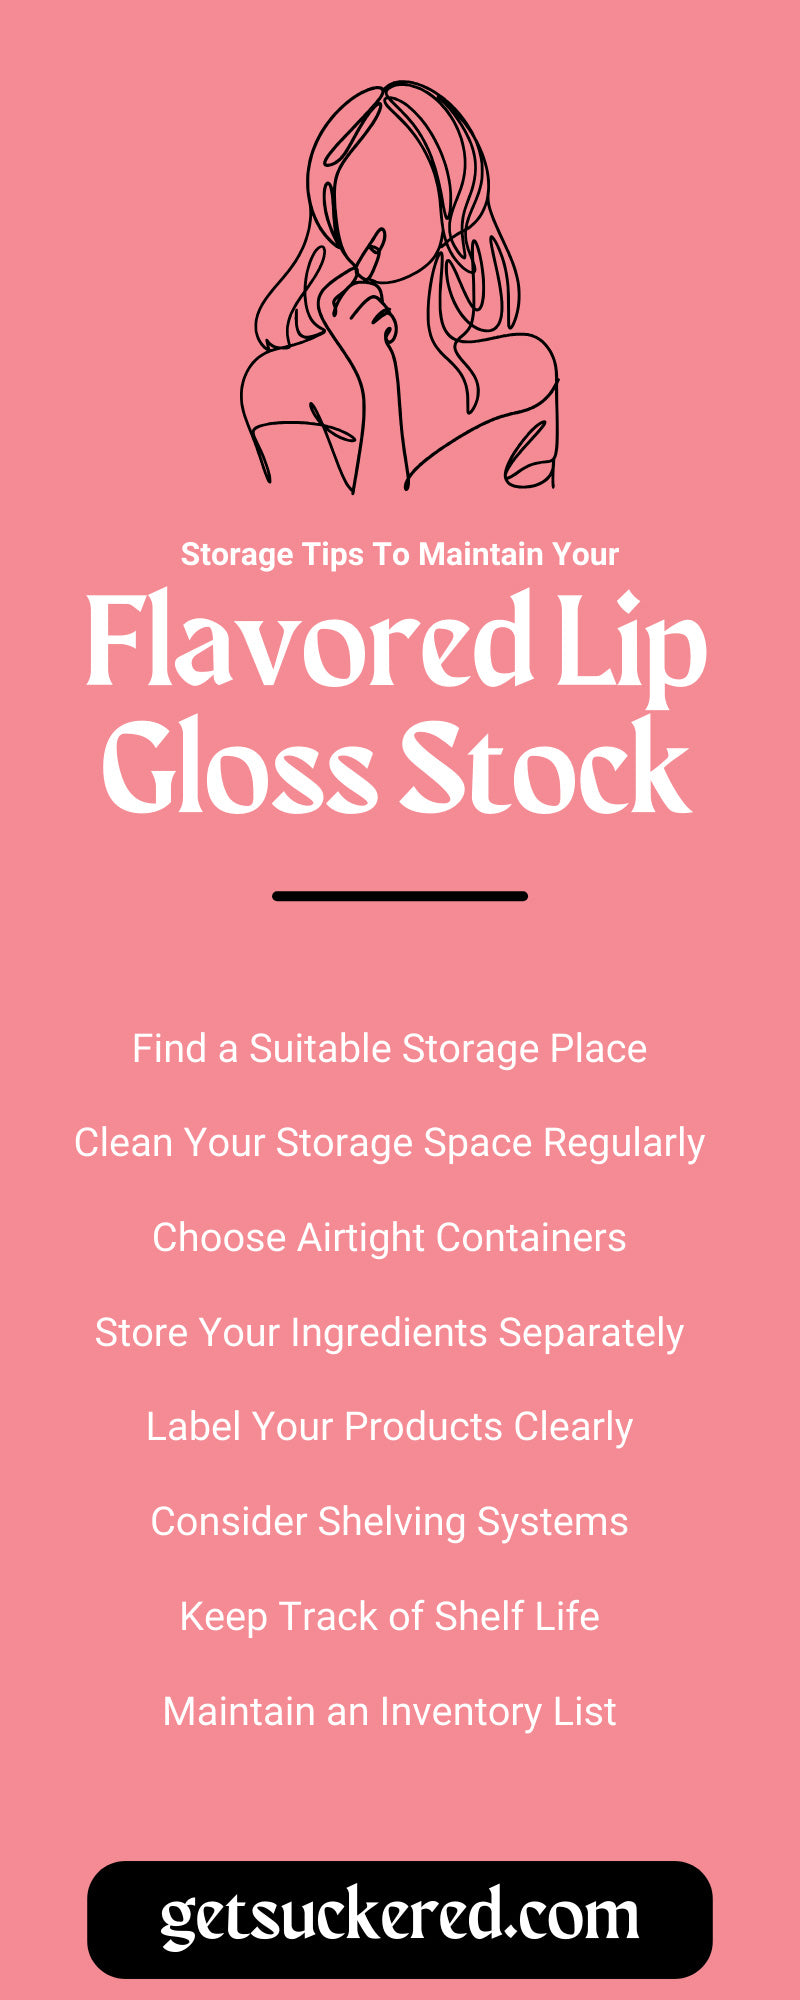 Storage Tips To Maintain Your Flavored Lip Gloss Stock